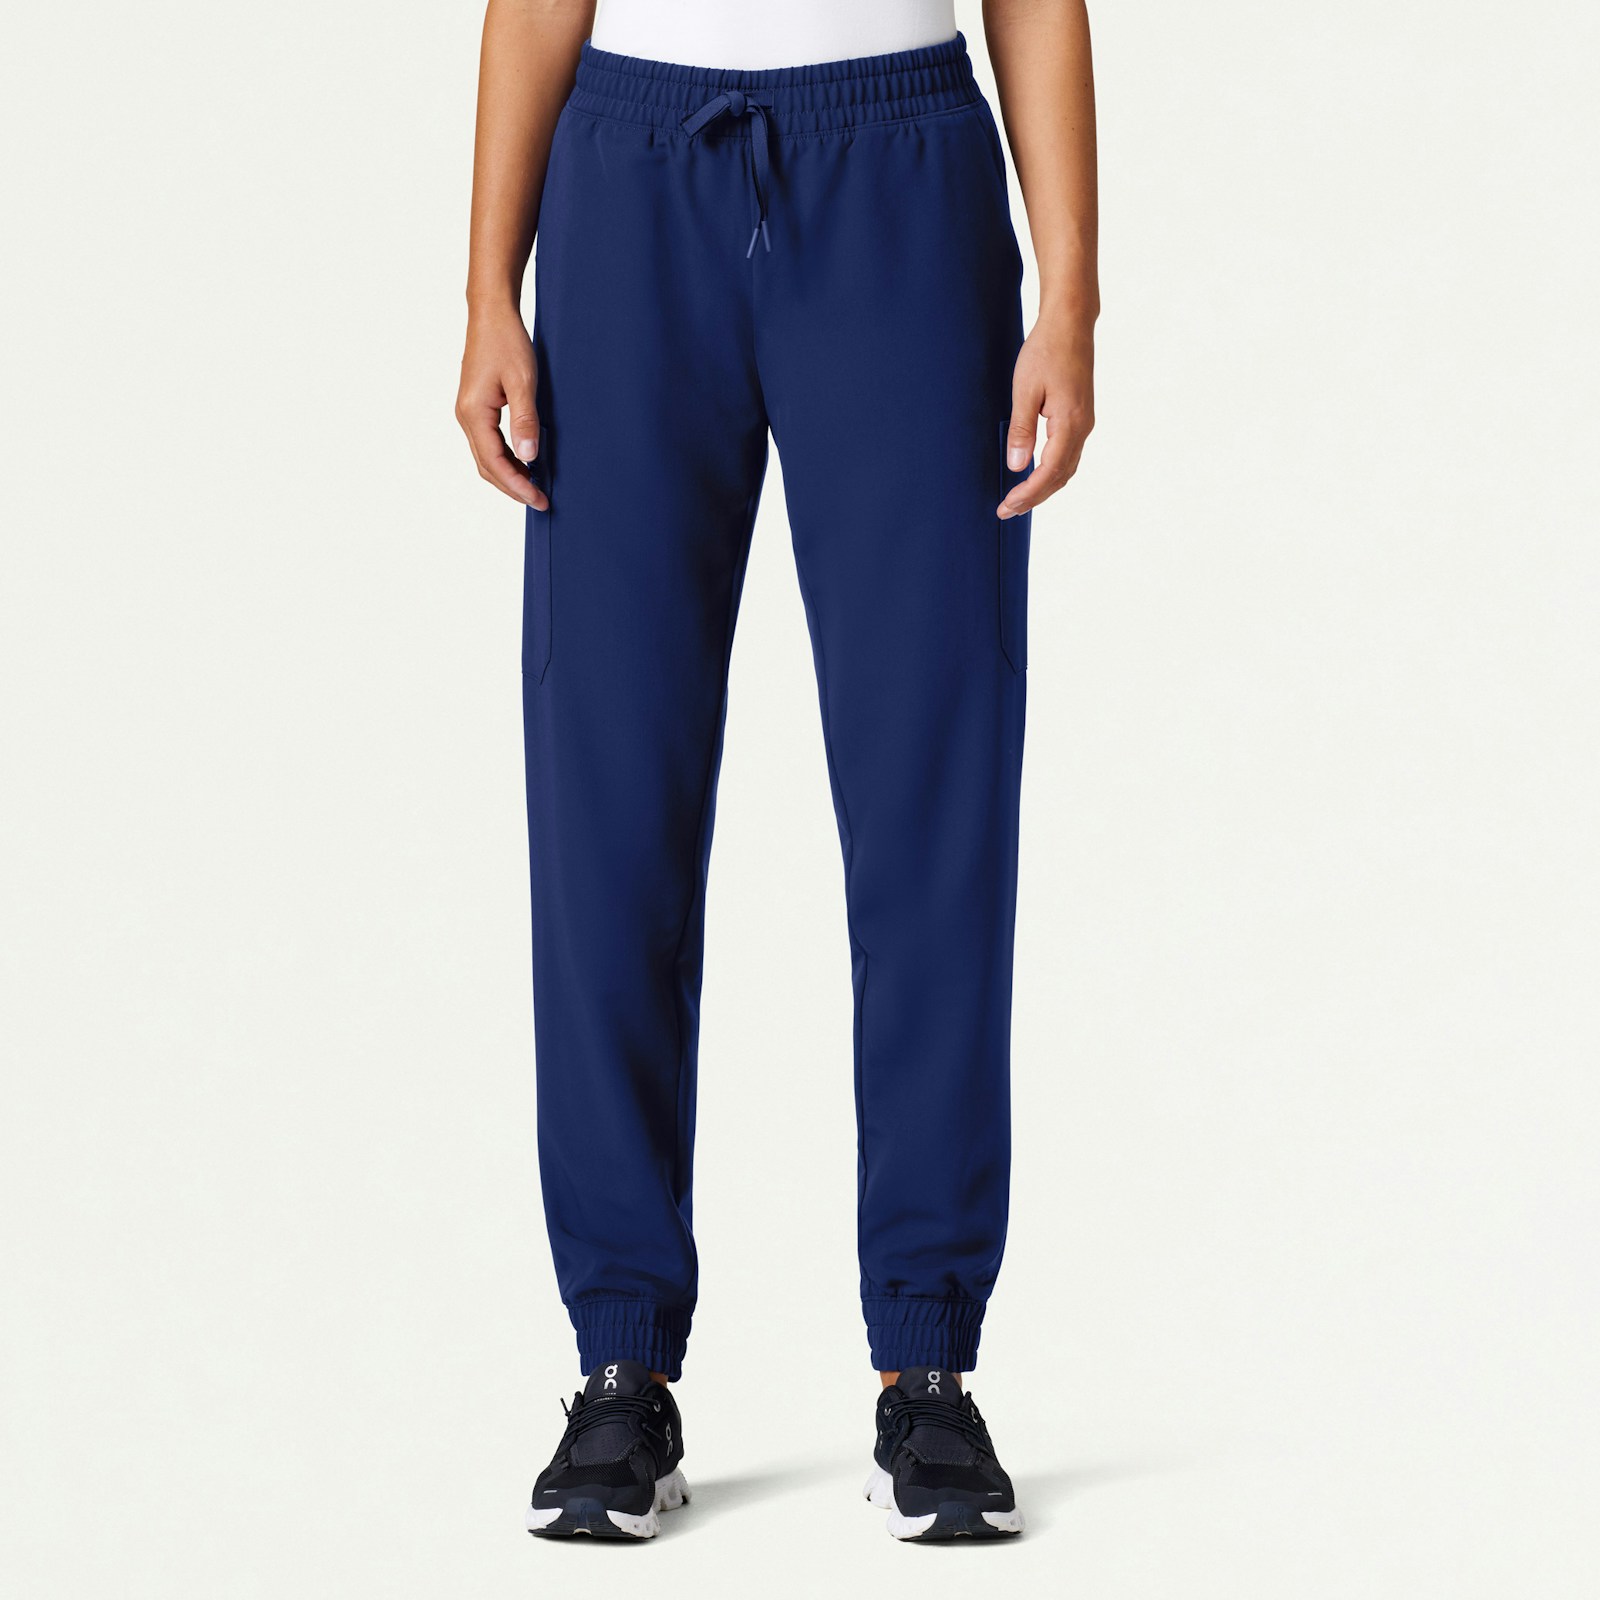 Neo Classic Scrub Jogger in Navy Blue - Women's Pants by Jaanuu